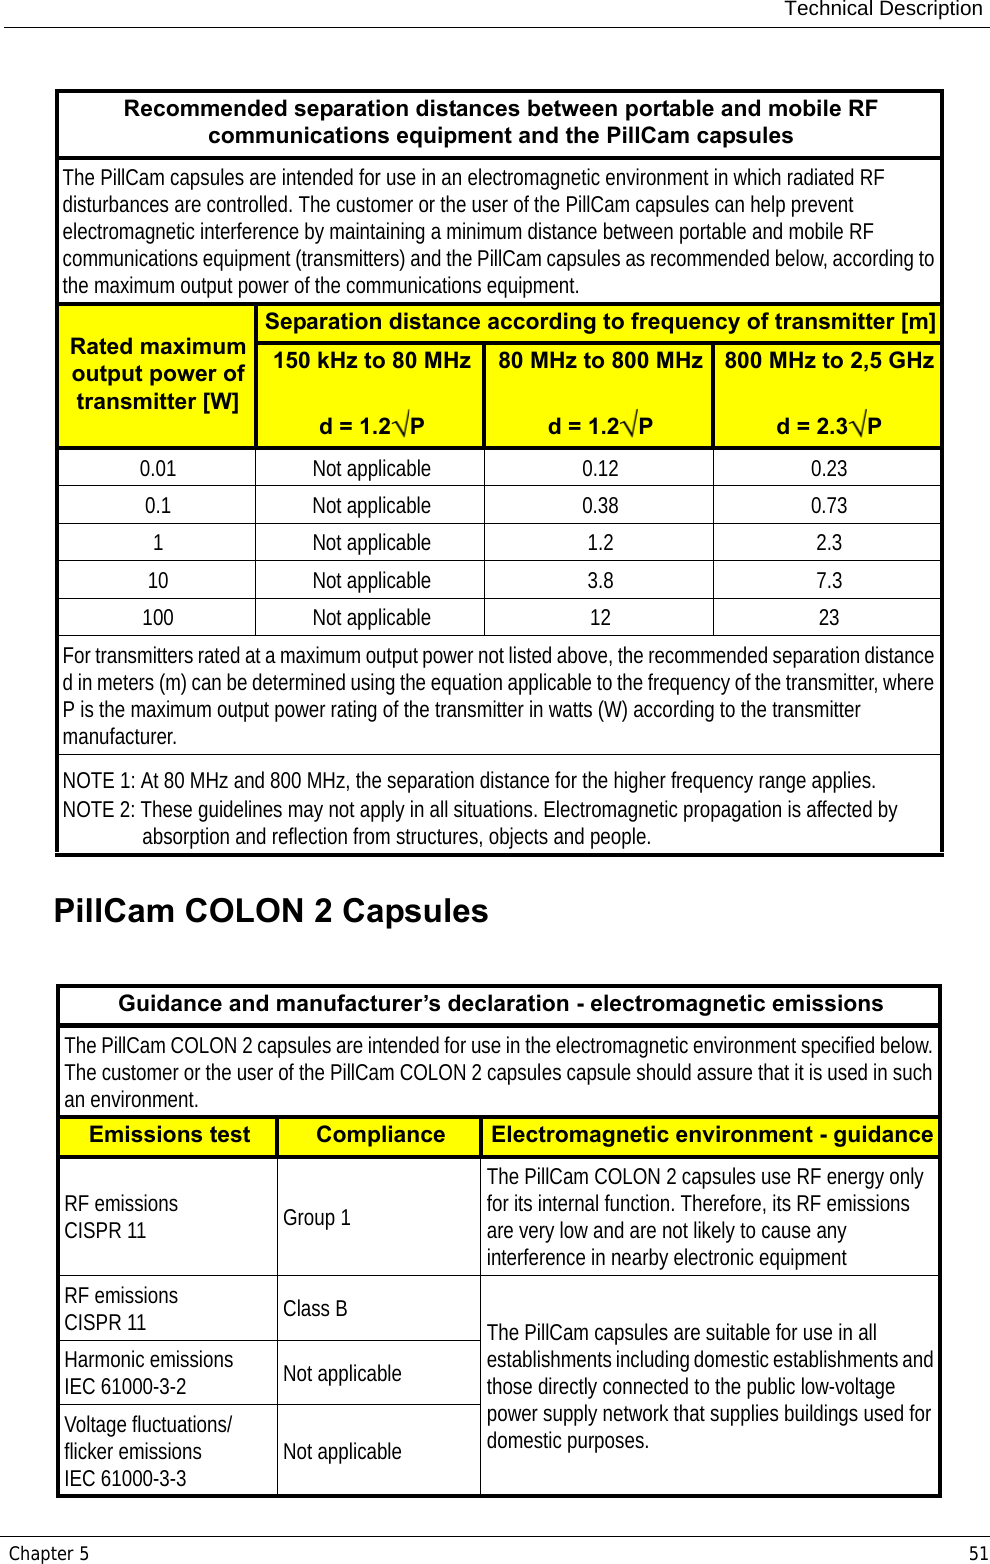 Technical DescriptionChapter 5 51PillCam COLON 2 Capsules Recommended separation distances between portable and mobile RF communications equipment and the PillCam capsulesThe PillCam capsules are intended for use in an electromagnetic environment in which radiated RF disturbances are controlled. The customer or the user of the PillCam capsules can help prevent electromagnetic interference by maintaining a minimum distance between portable and mobile RF communications equipment (transmitters) and the PillCam capsules as recommended below, according to the maximum output power of the communications equipment.Rated maximum output power of transmitter [W]Separation distance according to frequency of transmitter [m]150 kHz to 80 MHzd = 1.2 P80 MHz to 800 MHzd = 1.2 P800 MHz to 2,5 GHzd = 2.3 P0.01 Not applicable 0.12 0.230.1 Not applicable 0.38 0.731 Not applicable 1.2 2.310 Not applicable 3.8 7.3100 Not applicable 12 23For transmitters rated at a maximum output power not listed above, the recommended separation distance d in meters (m) can be determined using the equation applicable to the frequency of the transmitter, where P is the maximum output power rating of the transmitter in watts (W) according to the transmitter manufacturer.NOTE 1: At 80 MHz and 800 MHz, the separation distance for the higher frequency range applies.NOTE 2: These guidelines may not apply in all situations. Electromagnetic propagation is affected by absorption and reflection from structures, objects and people.Guidance and manufacturer’s declaration - electromagnetic emissionsThe PillCam COLON 2 capsules are intended for use in the electromagnetic environment specified below. The customer or the user of the PillCam COLON 2 capsules capsule should assure that it is used in such an environment.Emissions test Compliance Electromagnetic environment - guidanceRF emissionsCISPR 11 Group 1The PillCam COLON 2 capsules use RF energy only for its internal function. Therefore, its RF emissions are very low and are not likely to cause any interference in nearby electronic equipmentRF emissionsCISPR 11 Class B The PillCam capsules are suitable for use in all establishments including domestic establishments and those directly connected to the public low-voltage power supply network that supplies buildings used for domestic purposes.Harmonic emissionsIEC 61000-3-2 Not applicableVoltage fluctuations/flicker emissionsIEC 61000-3-3 Not applicable